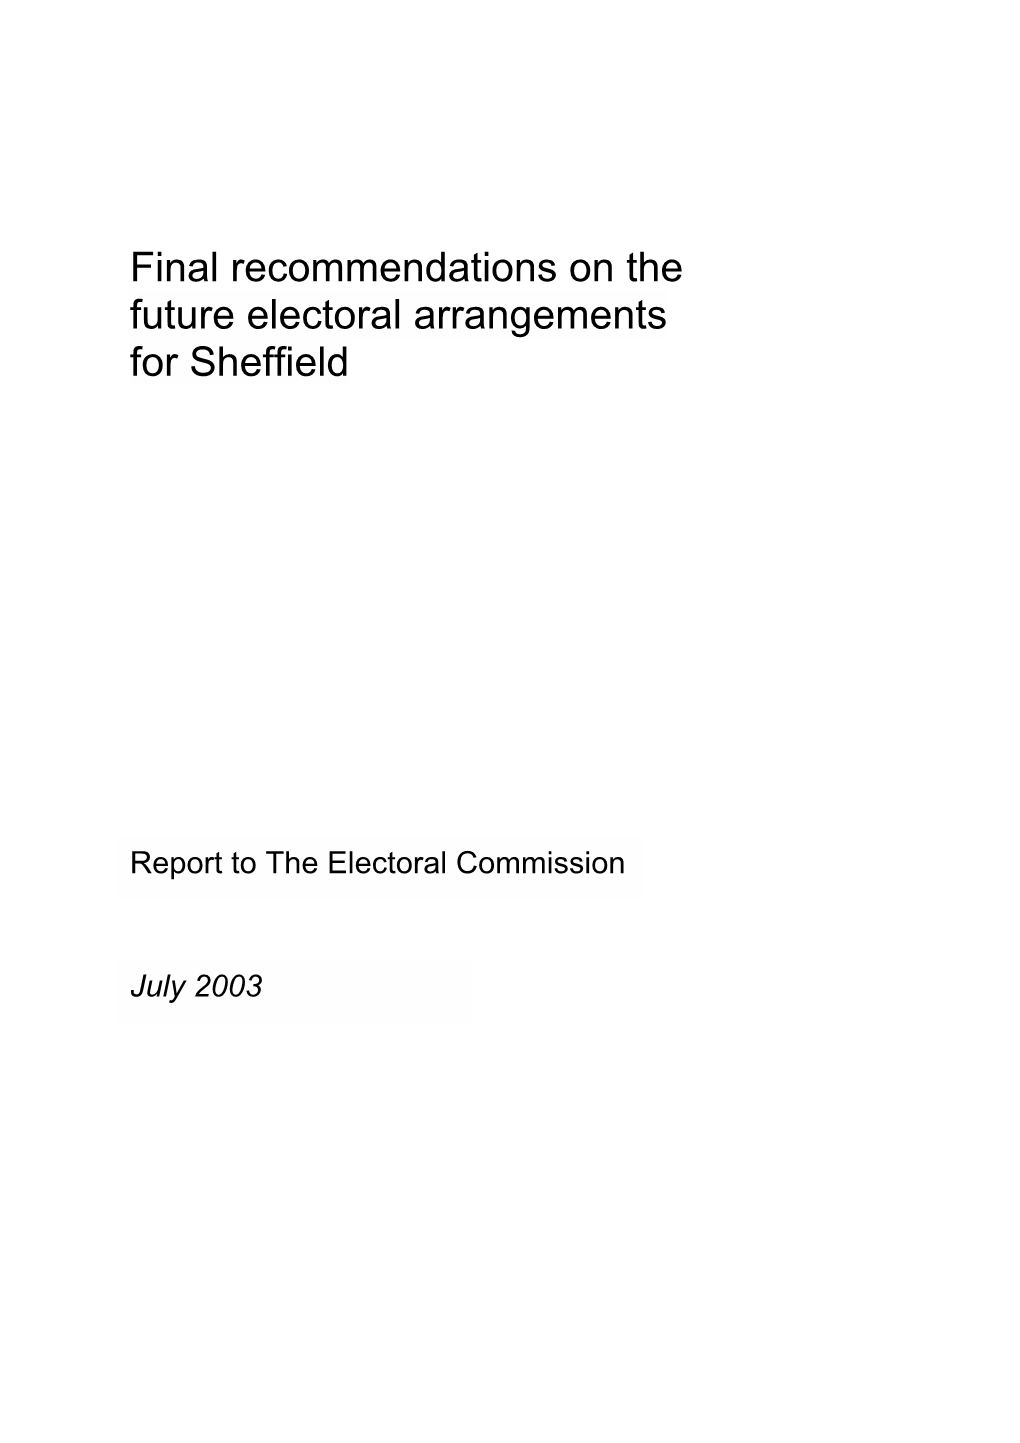 Final Recommendations on the Future Electoral Arrangements for Sheffield